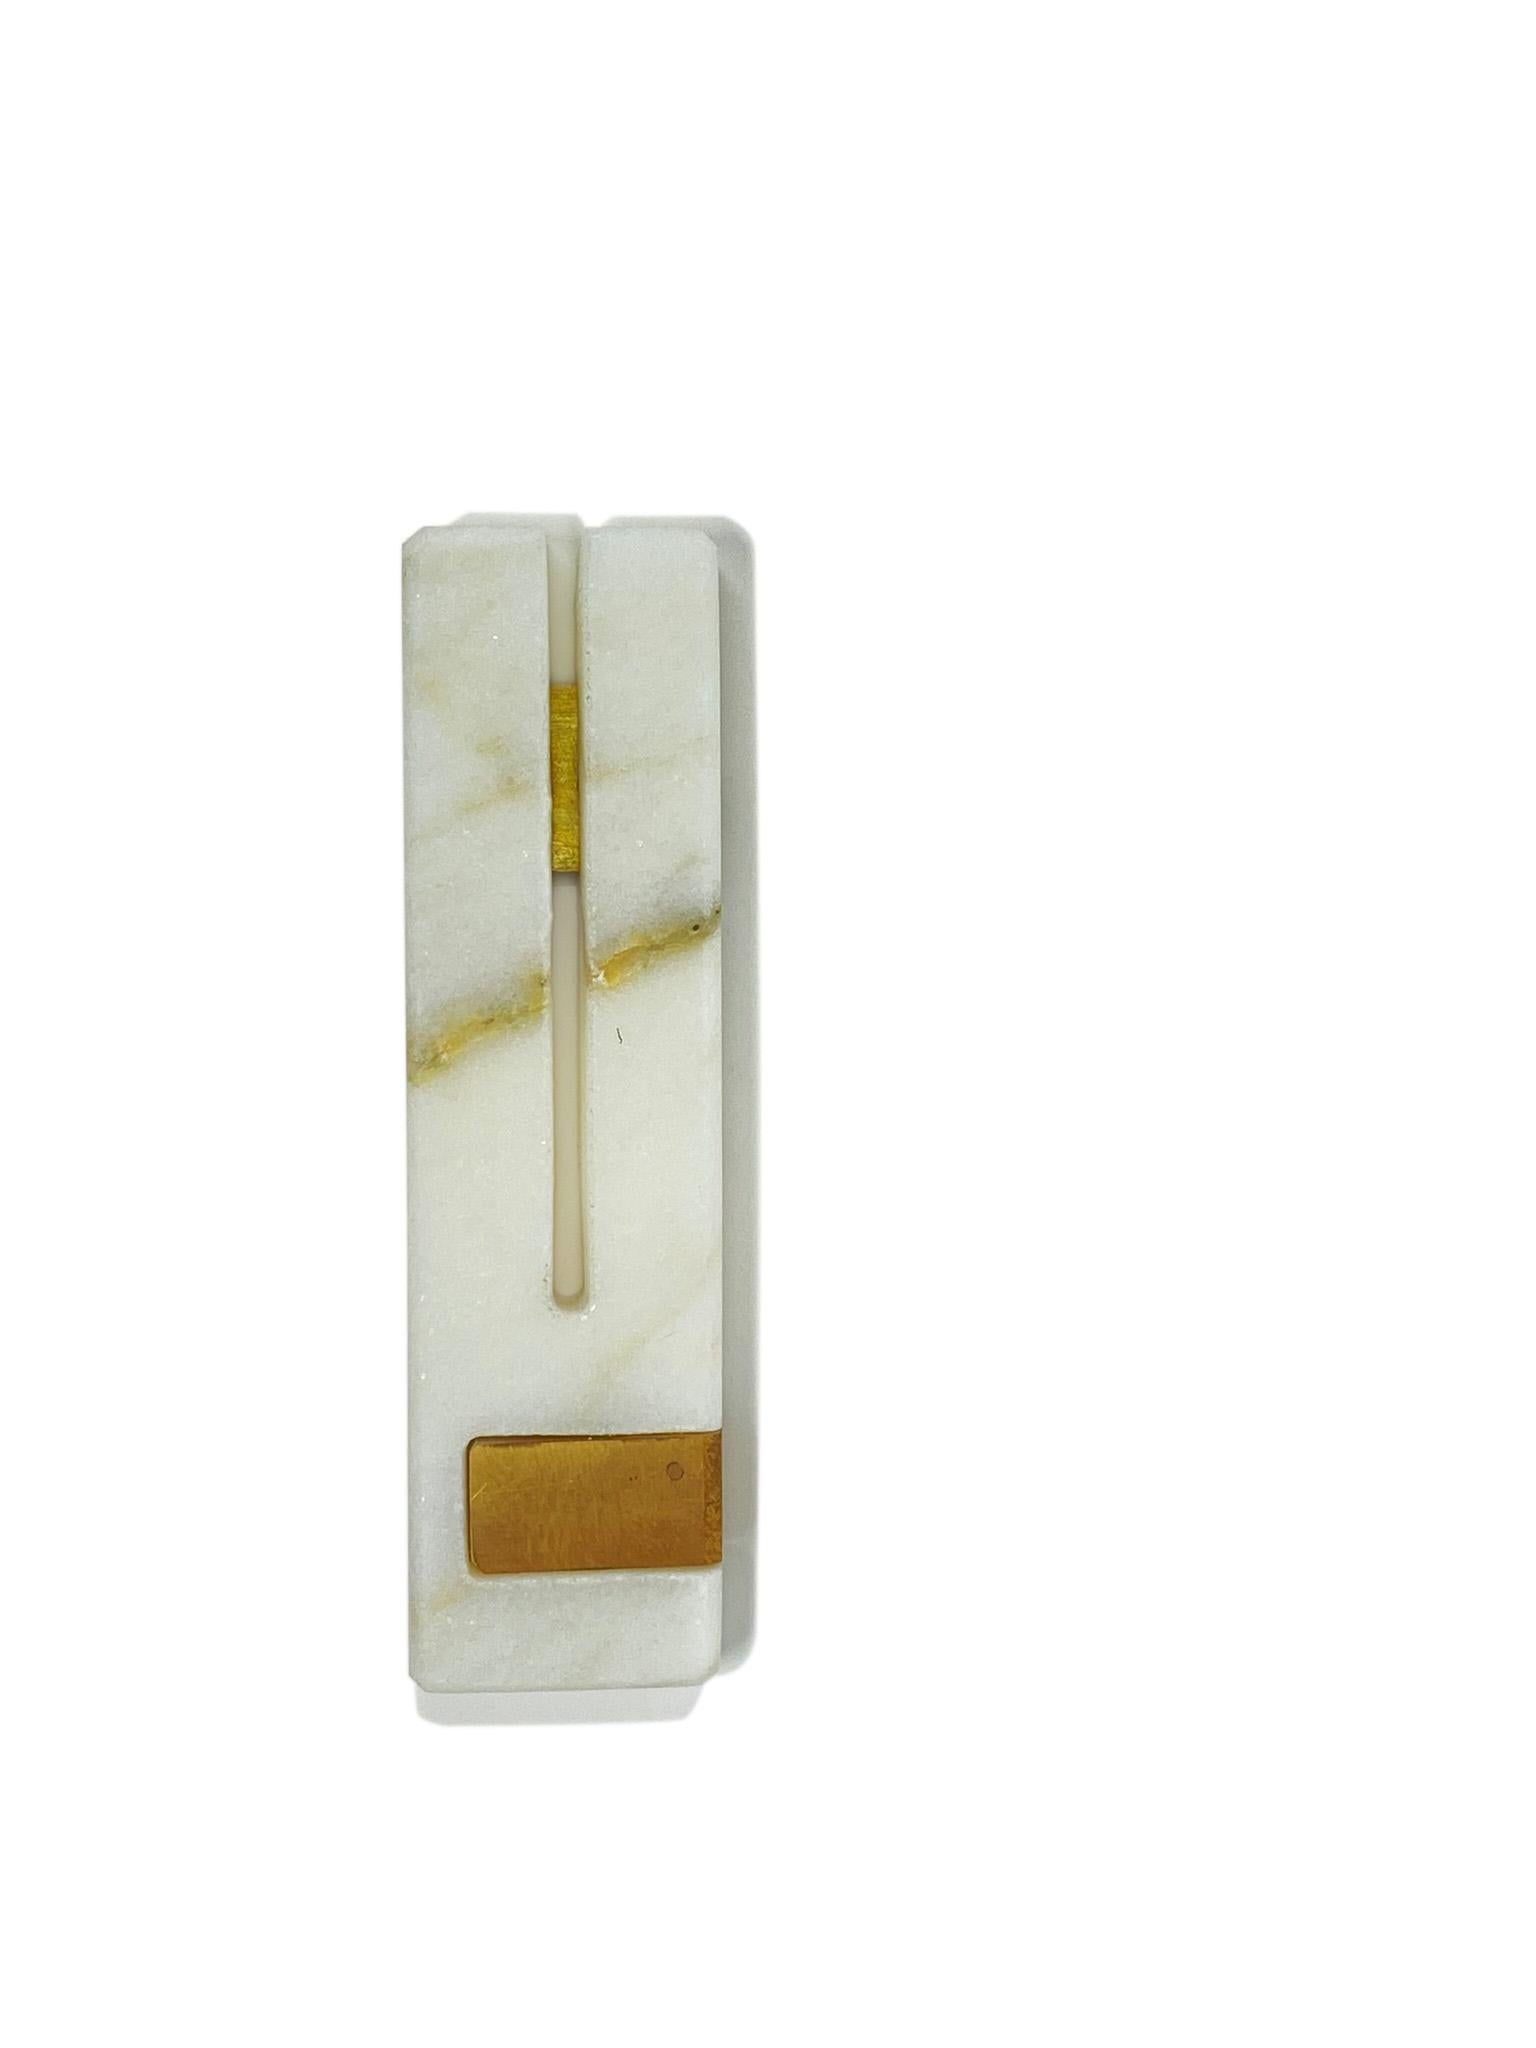 The “Brass” place holders, entirely made of Calacatta Oro marble, are exclusive place holders holders embellished with a brass tab that runs along the object from one end to the other, giving it a further touch of refined style. 

The Brass place